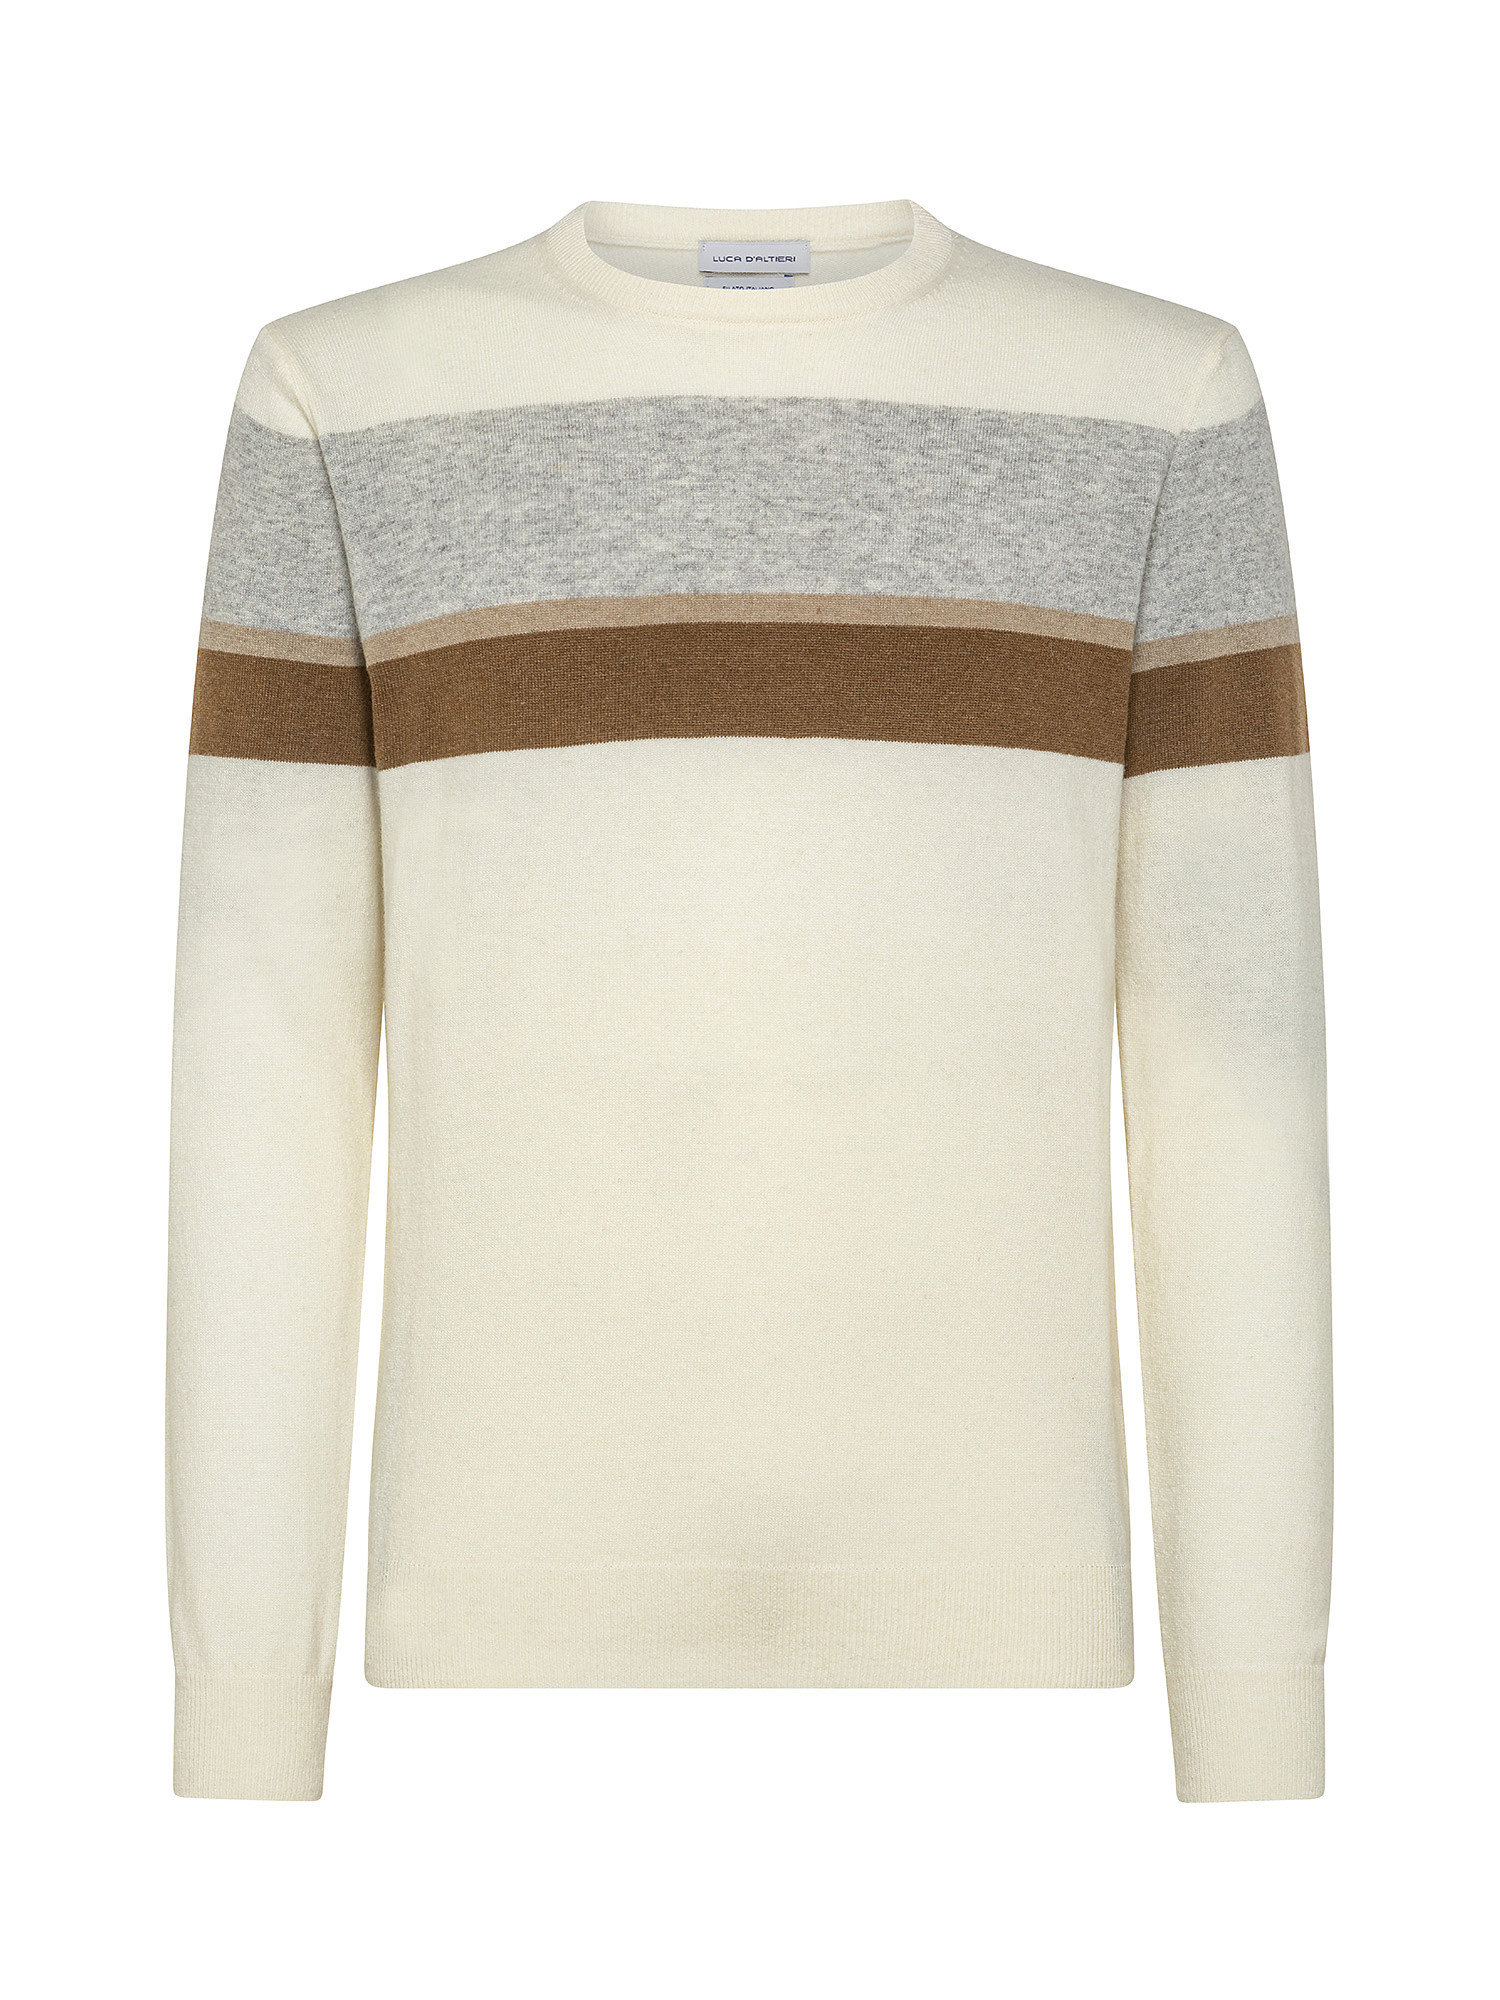 Three-color striped crewneck sweater in Blend cashmere, White Cream, large image number 0